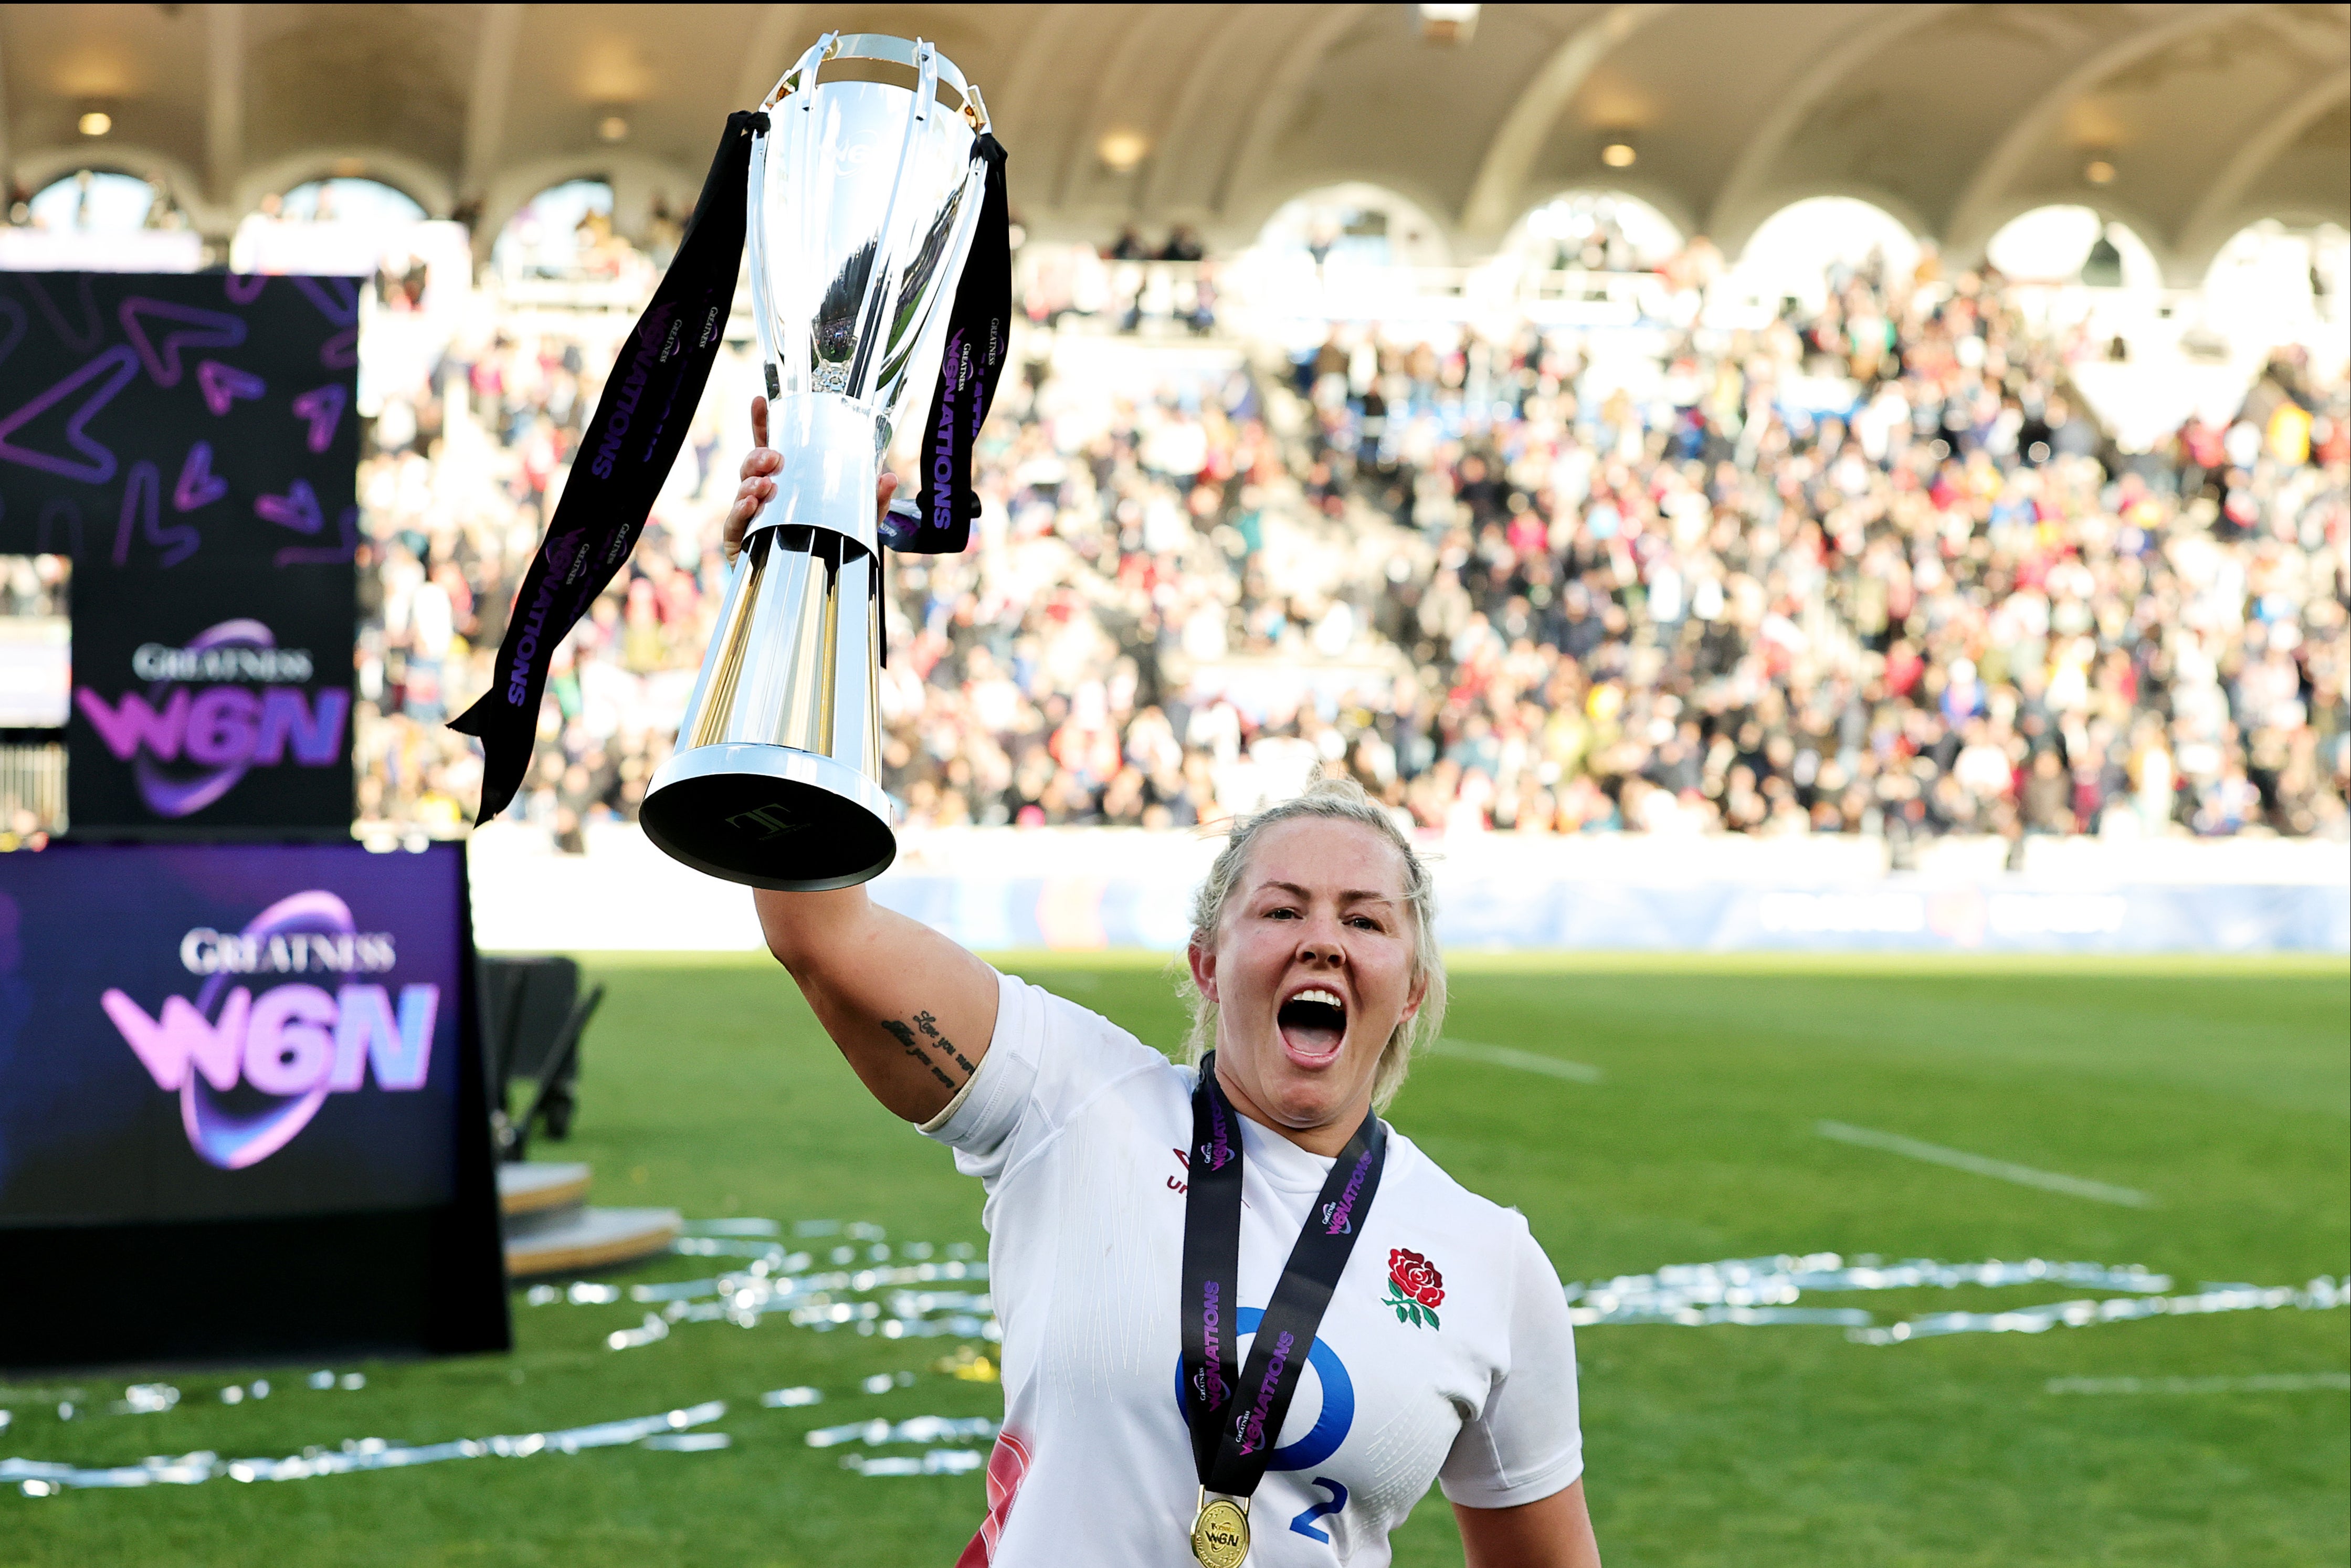 Marlie Packer led England to a sixth successive Six Nations crown